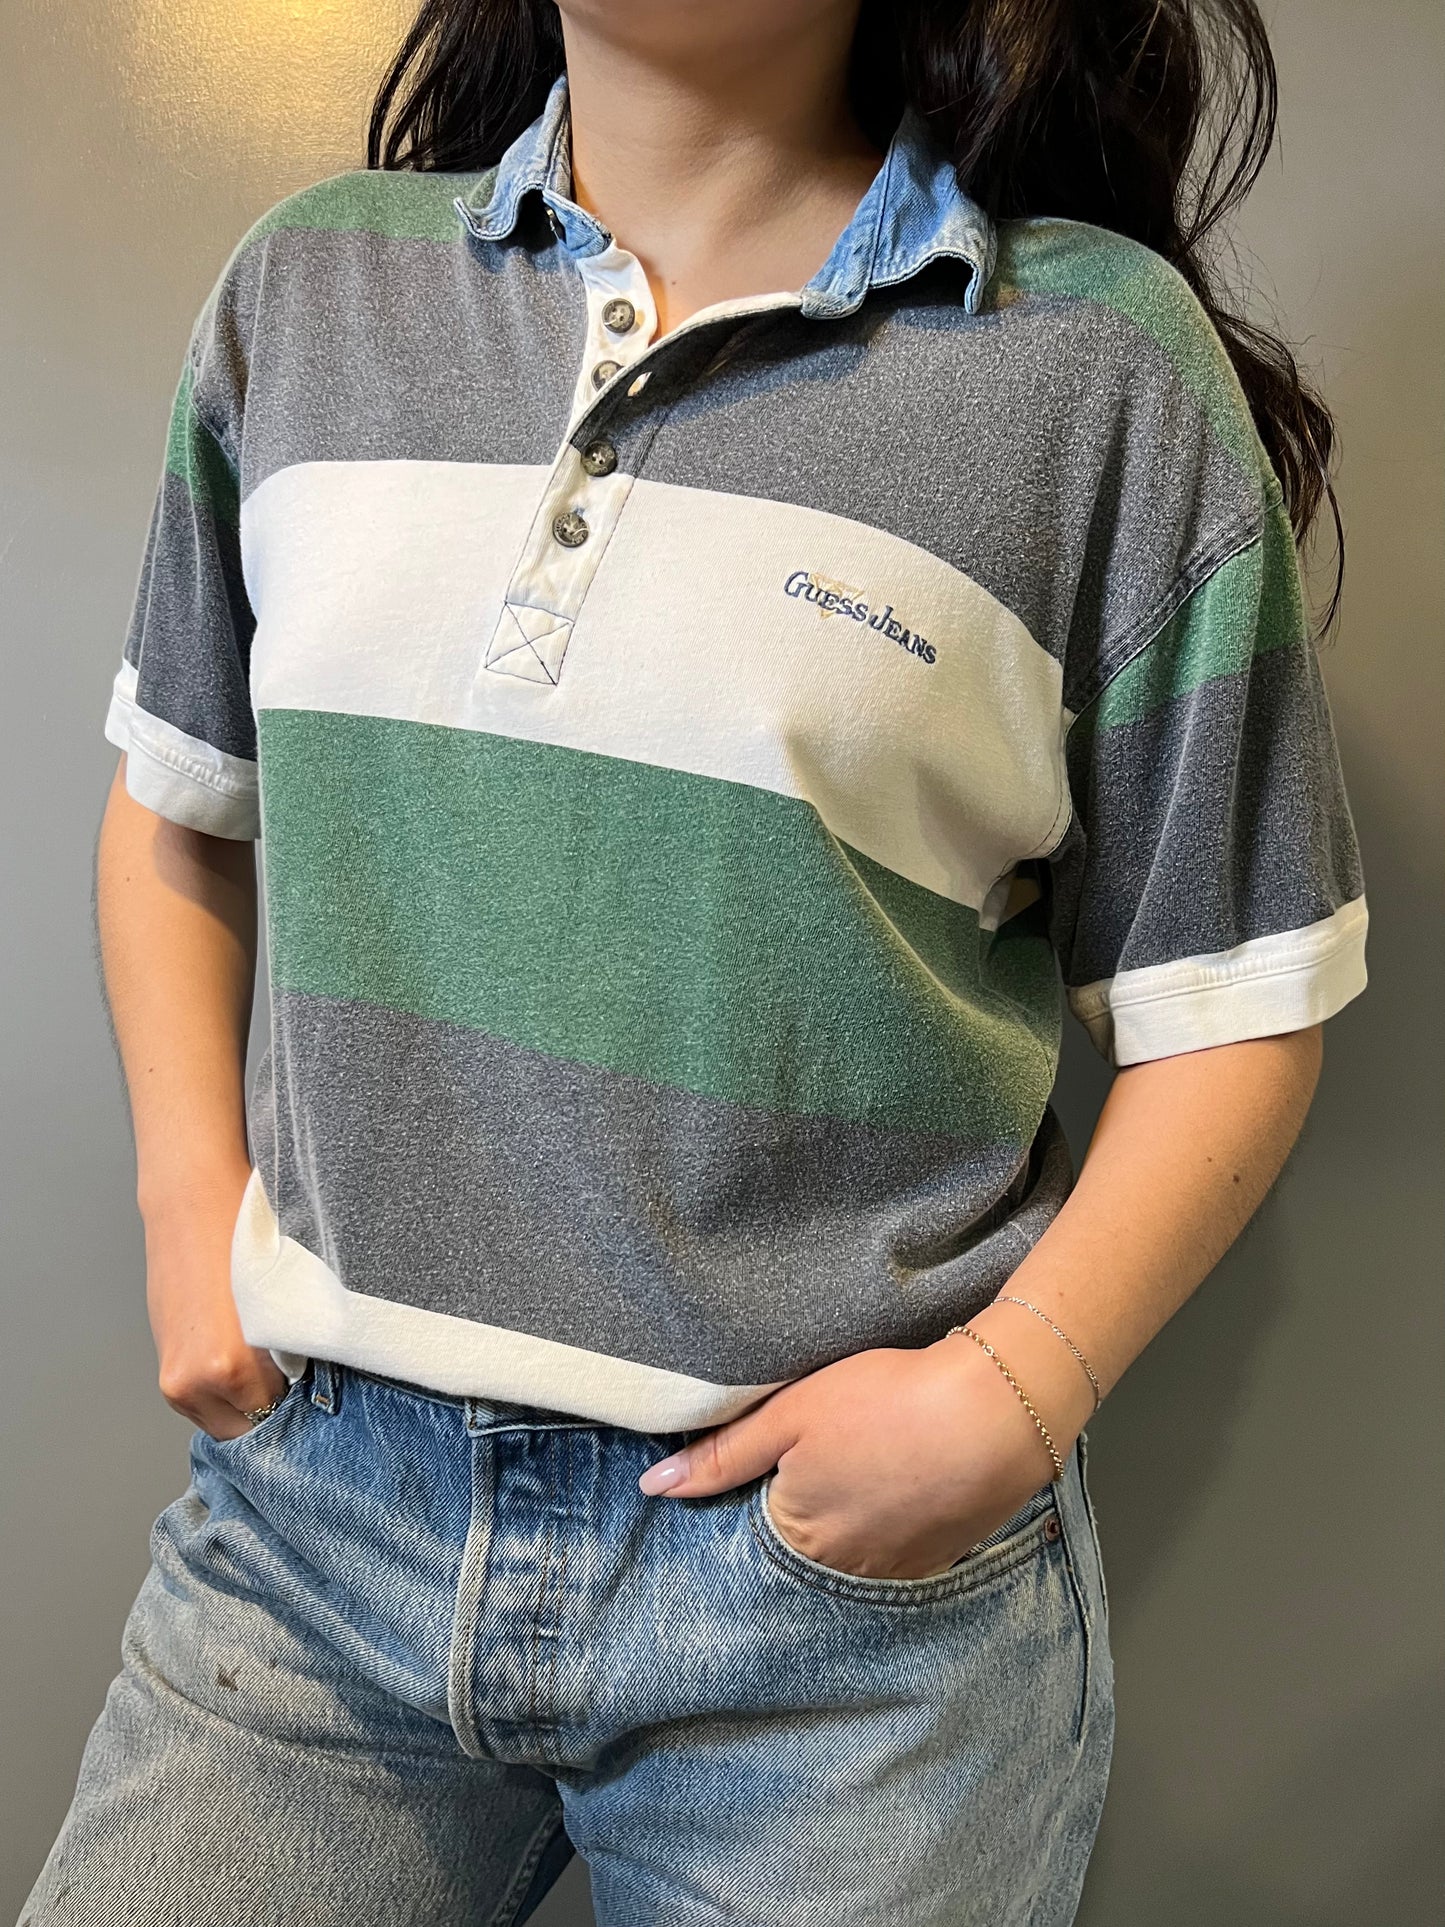 80's Guess Jeans Top - S/M